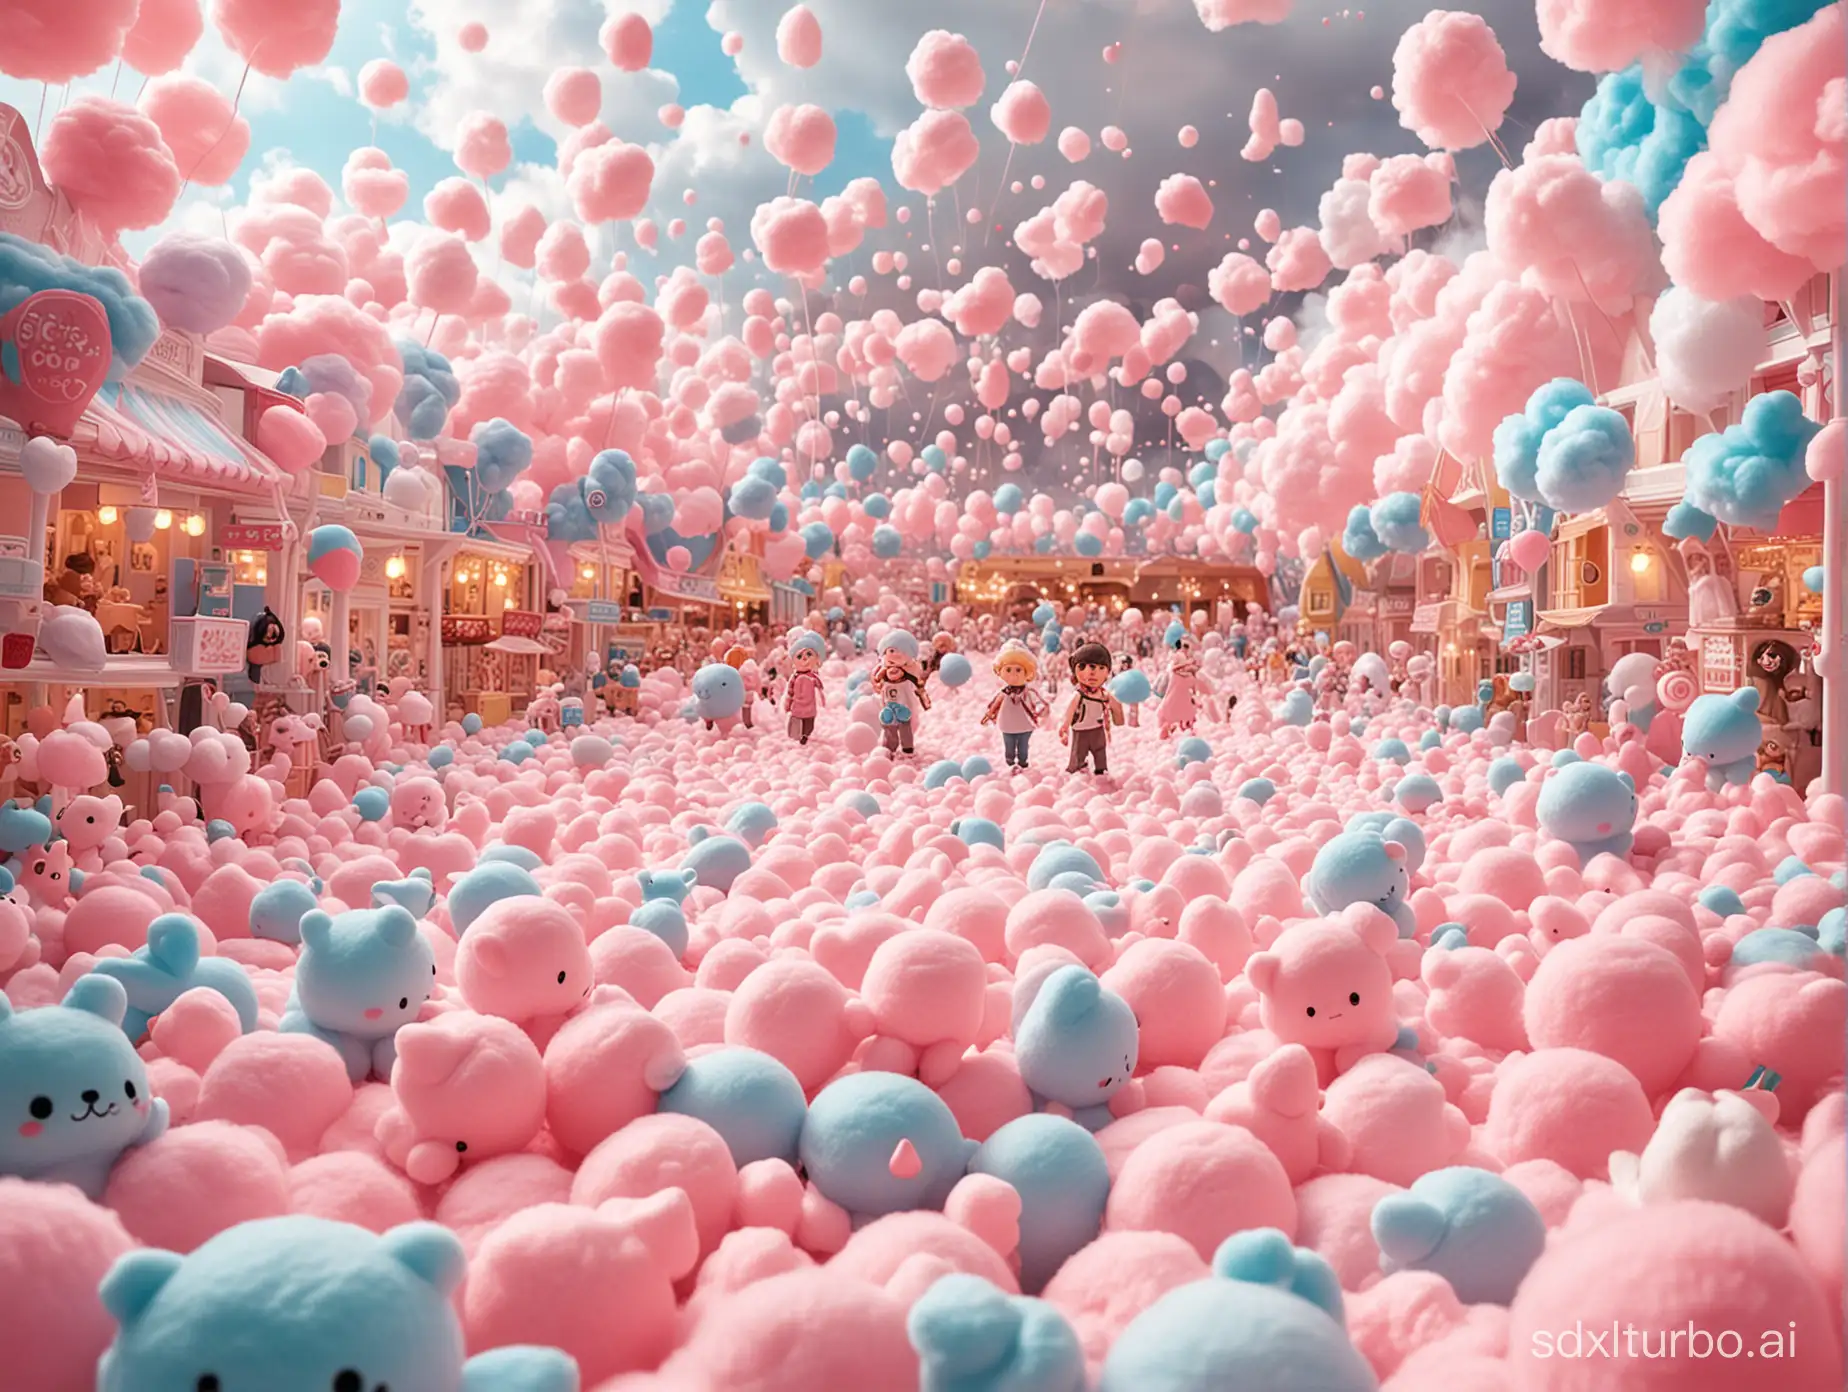 Whimsical-Wonderland-of-Adorable-Cotton-Candy-and-Figurines